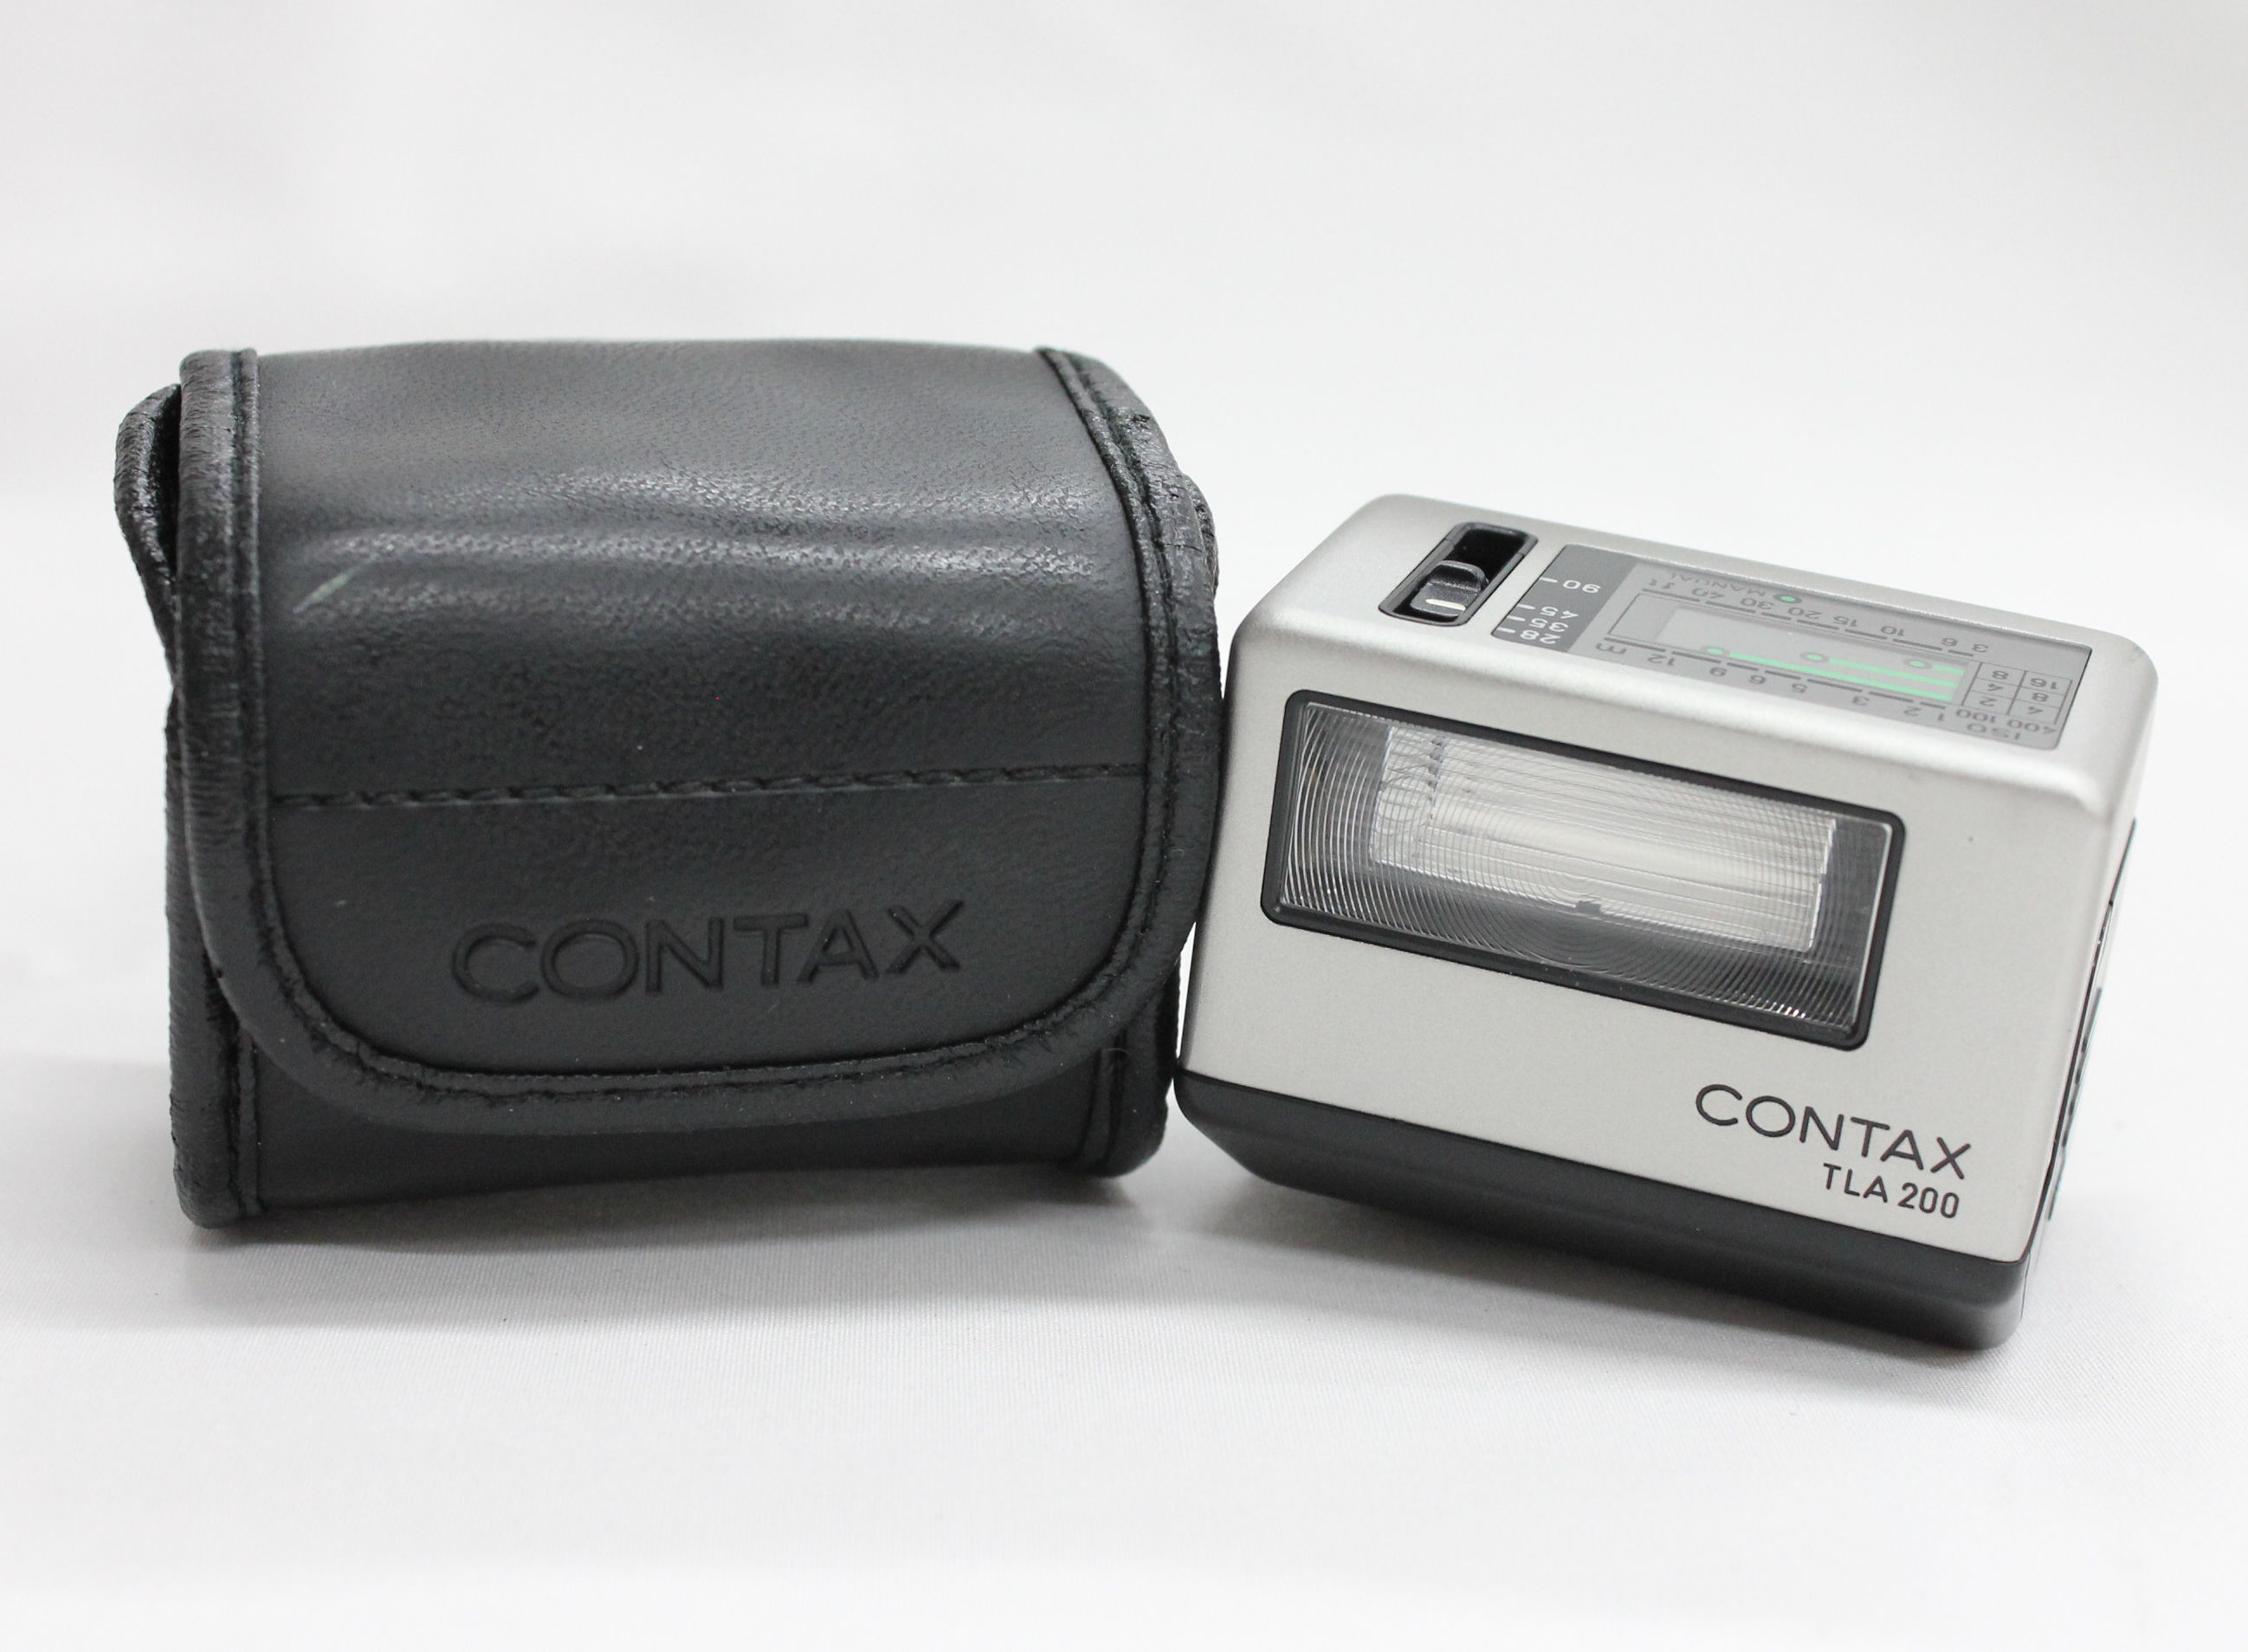 Japan Used Camera Shop | [Mint] Contax TLA 200 Shoe Mount Flash w / Leather Case for G1 G2 from Japan